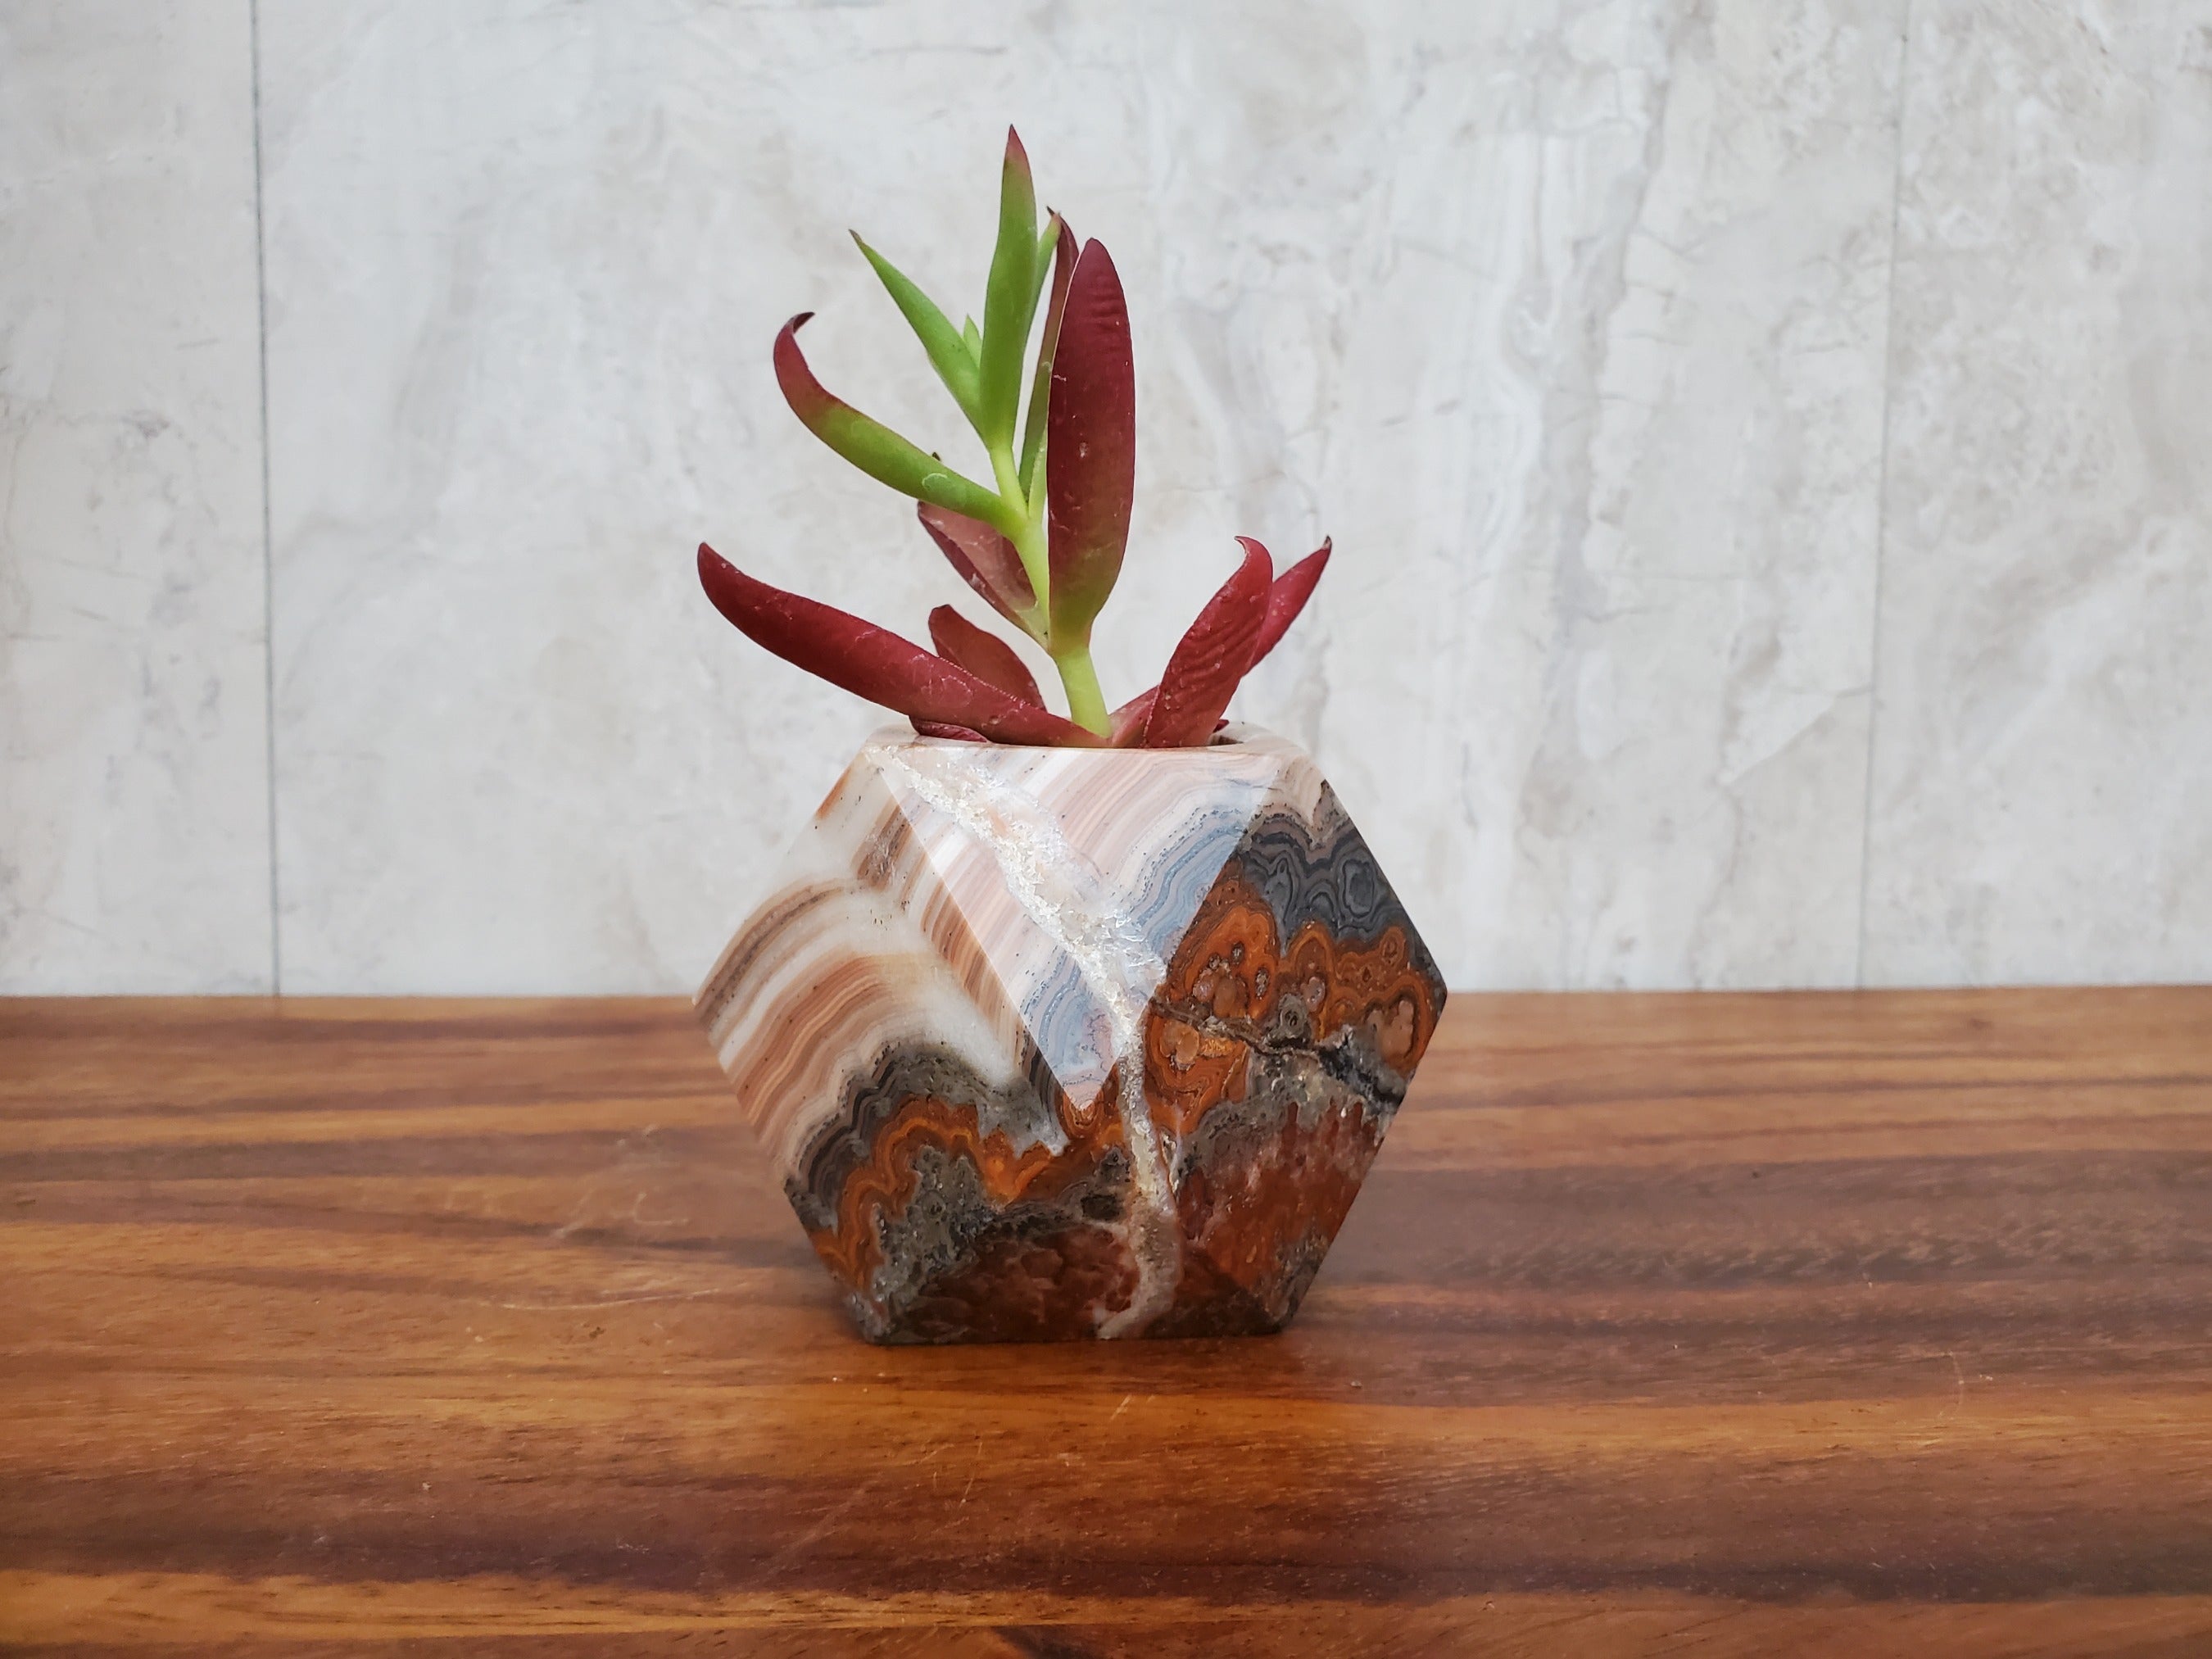 Red, White, and Gray Onyx Stone Geometric Mini Planter for Succulents and Terrariums. Handmade in Mexico. We ship and package from the USA. Buy now at www.felipeandgrace.com.